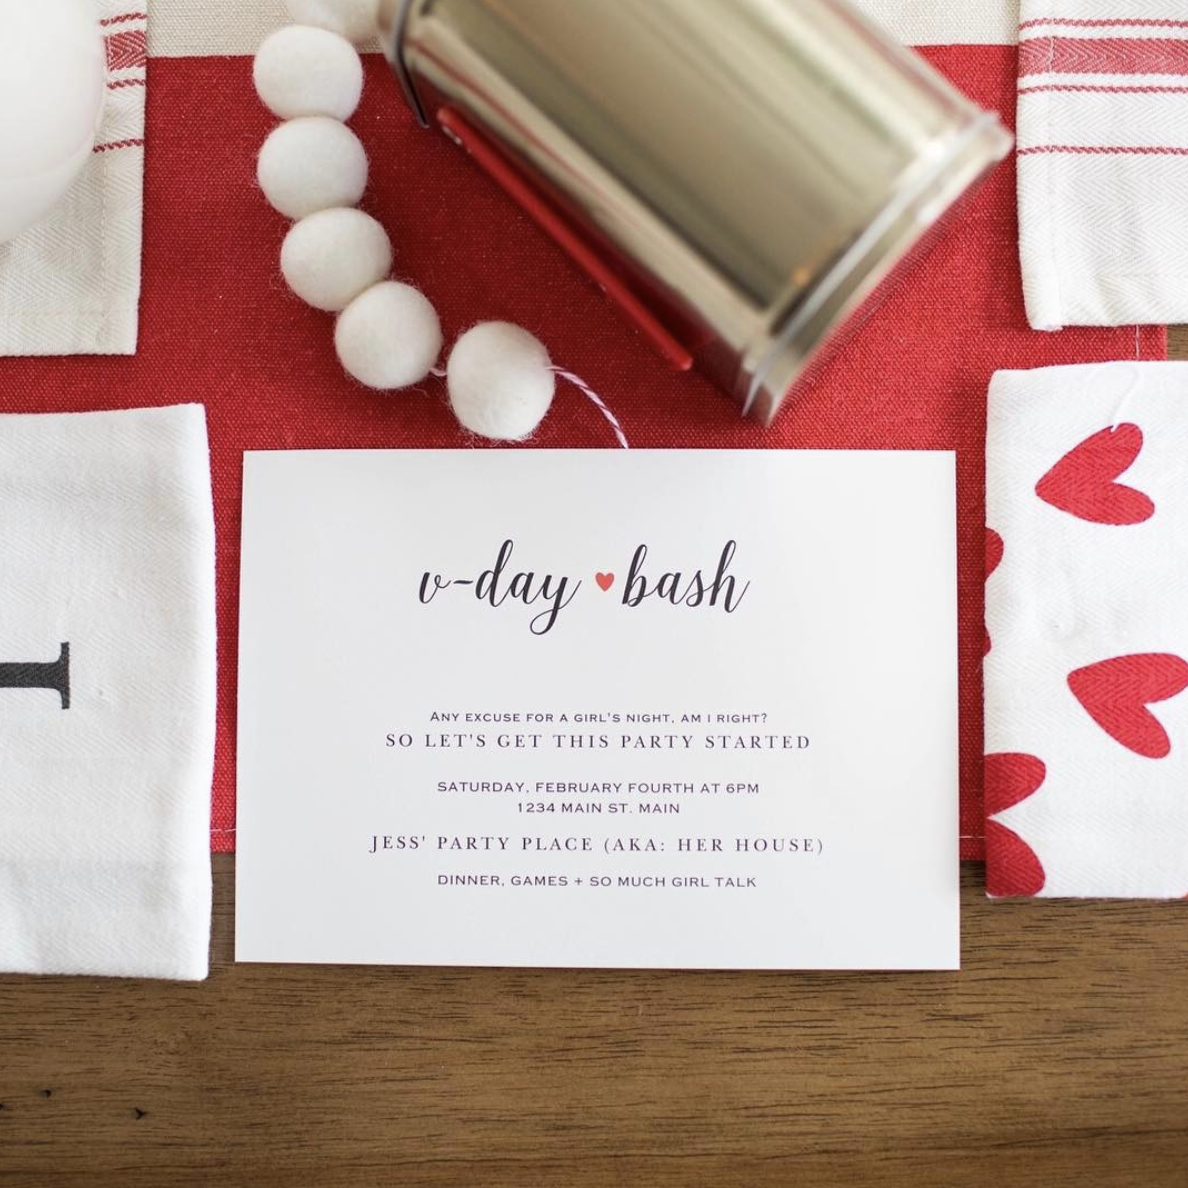 Newly Cultivated Valentine's Party Invitations from BasicInvite.com